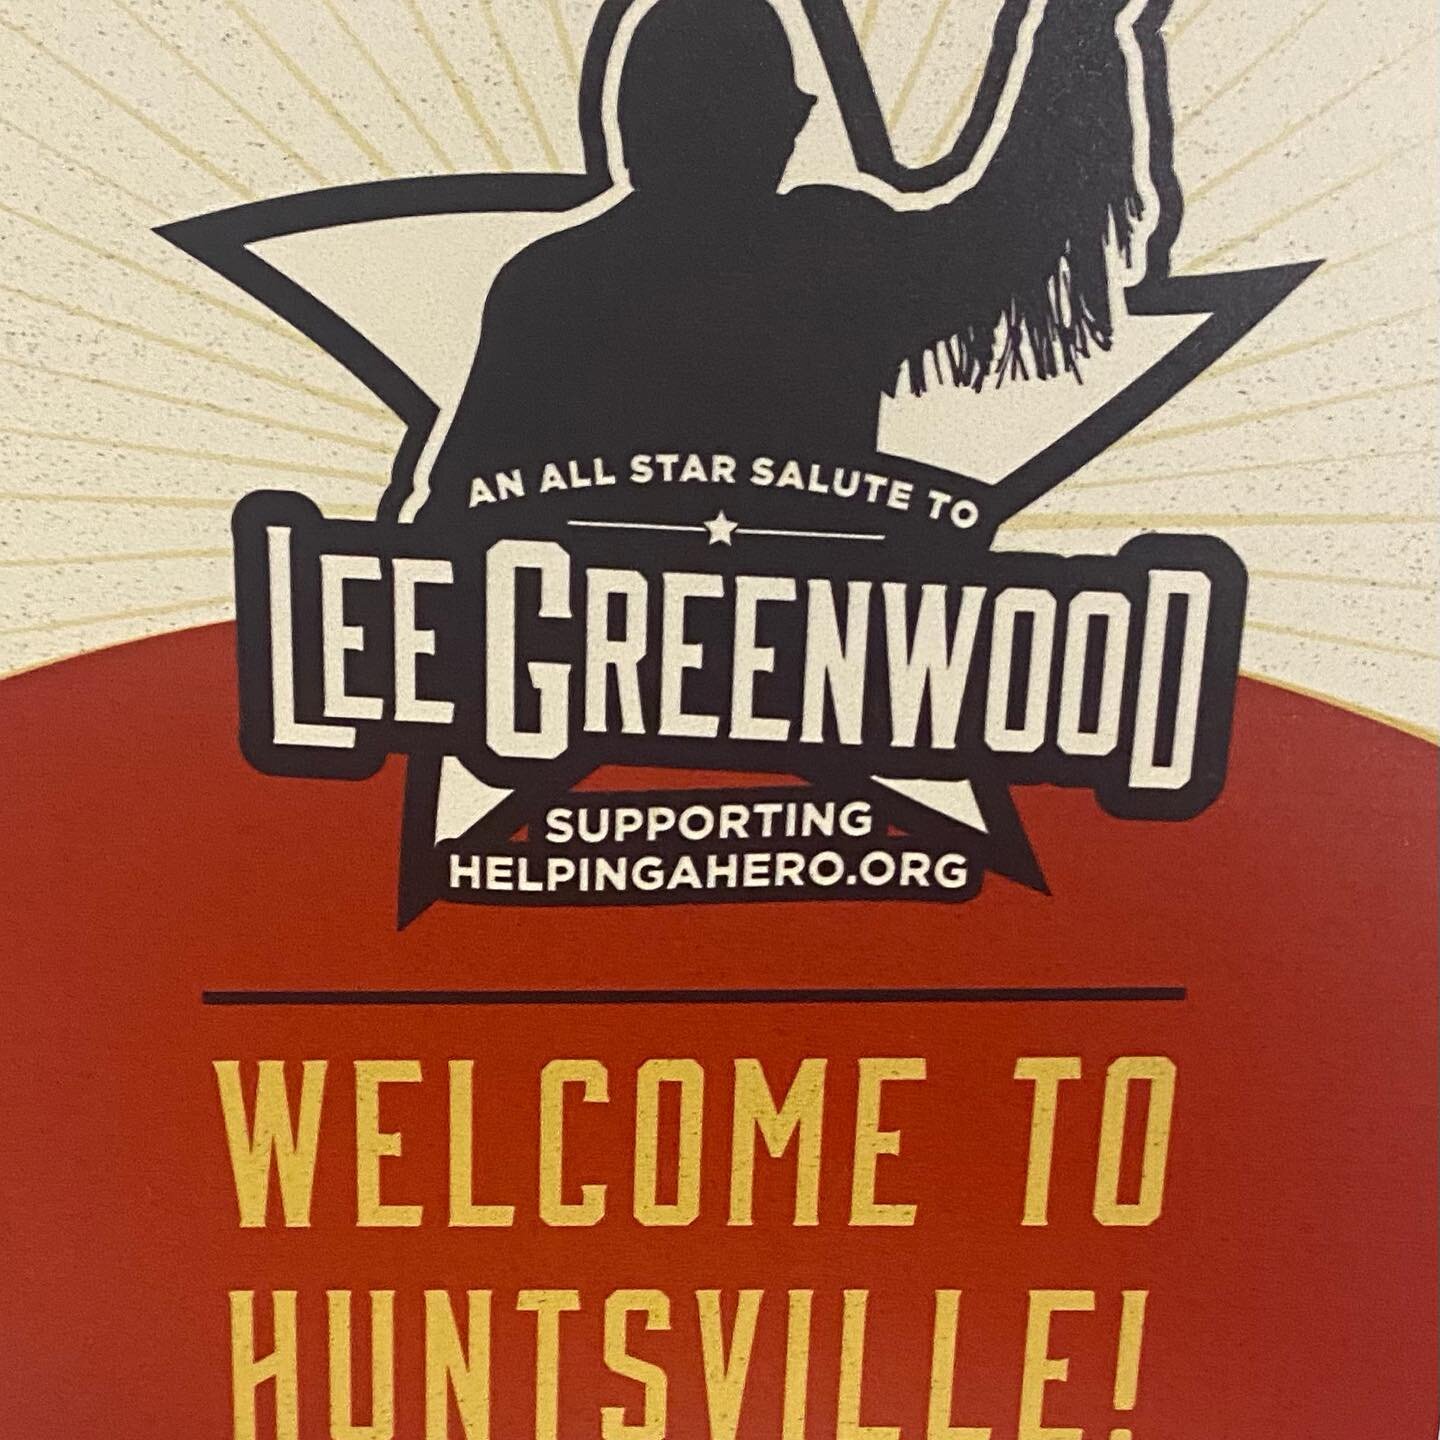 I left my comfort zone,in many ways, to be  part of a tribute to Lee Greenwood and his 40 years of making music. It took place in Huntsville, Alabama. This was a benefit for #helpingahero which is an amazing organization that provides homes for sever